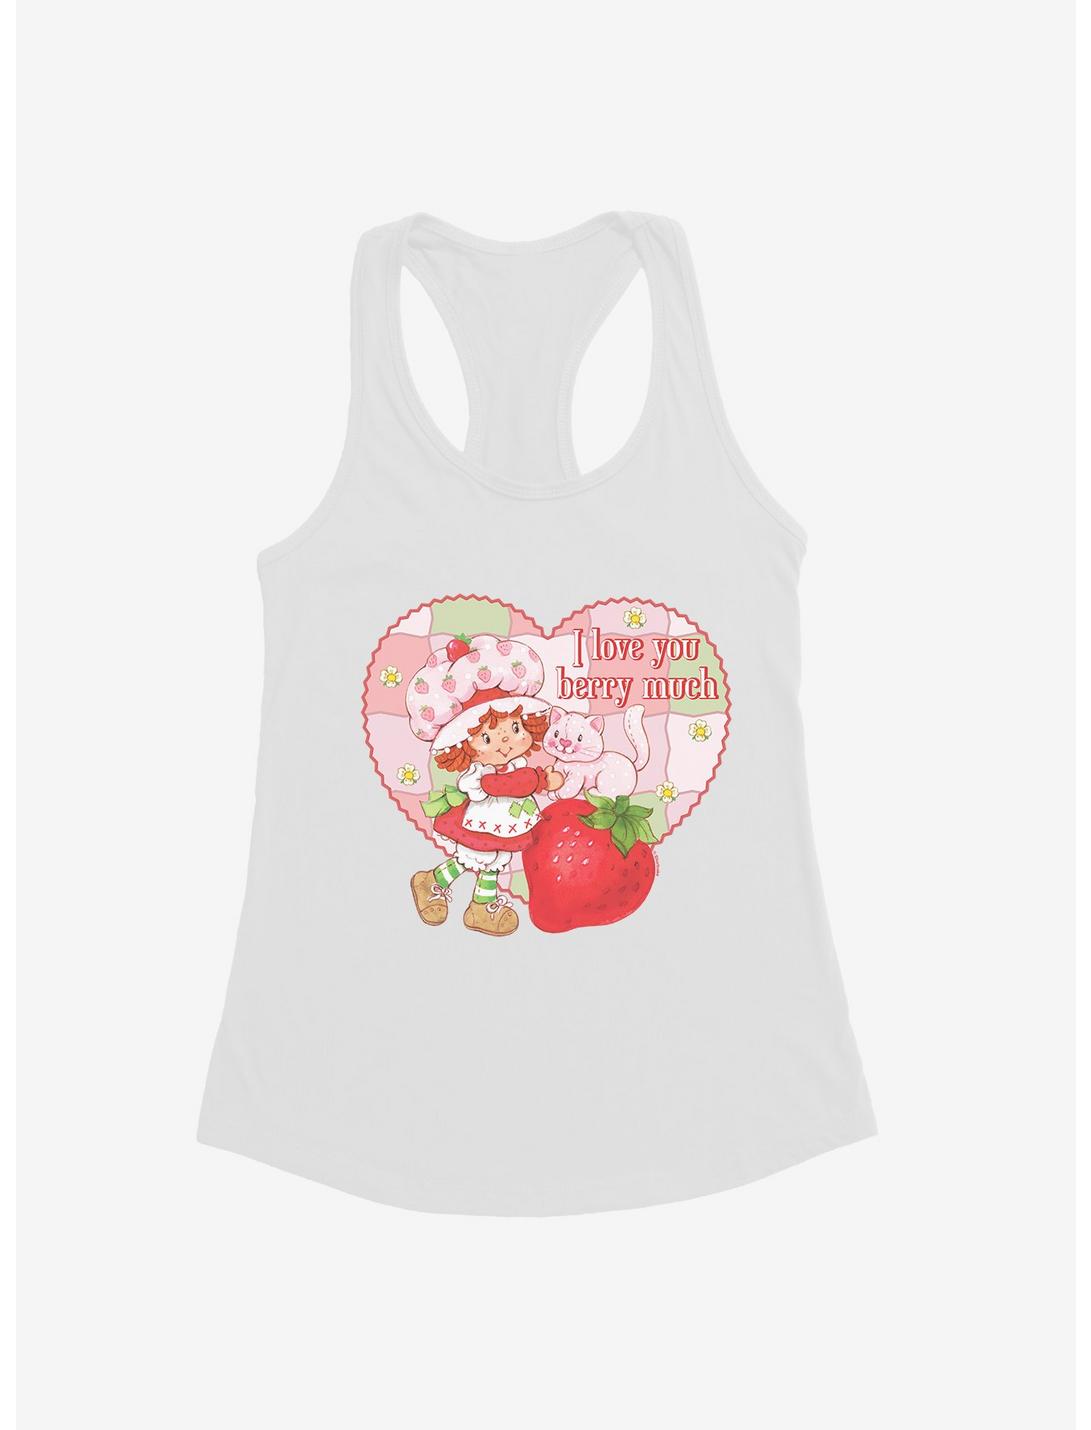 Strawberry Shortcake I Love You Berry Much Womens Tank Top, WHITE, hi-res